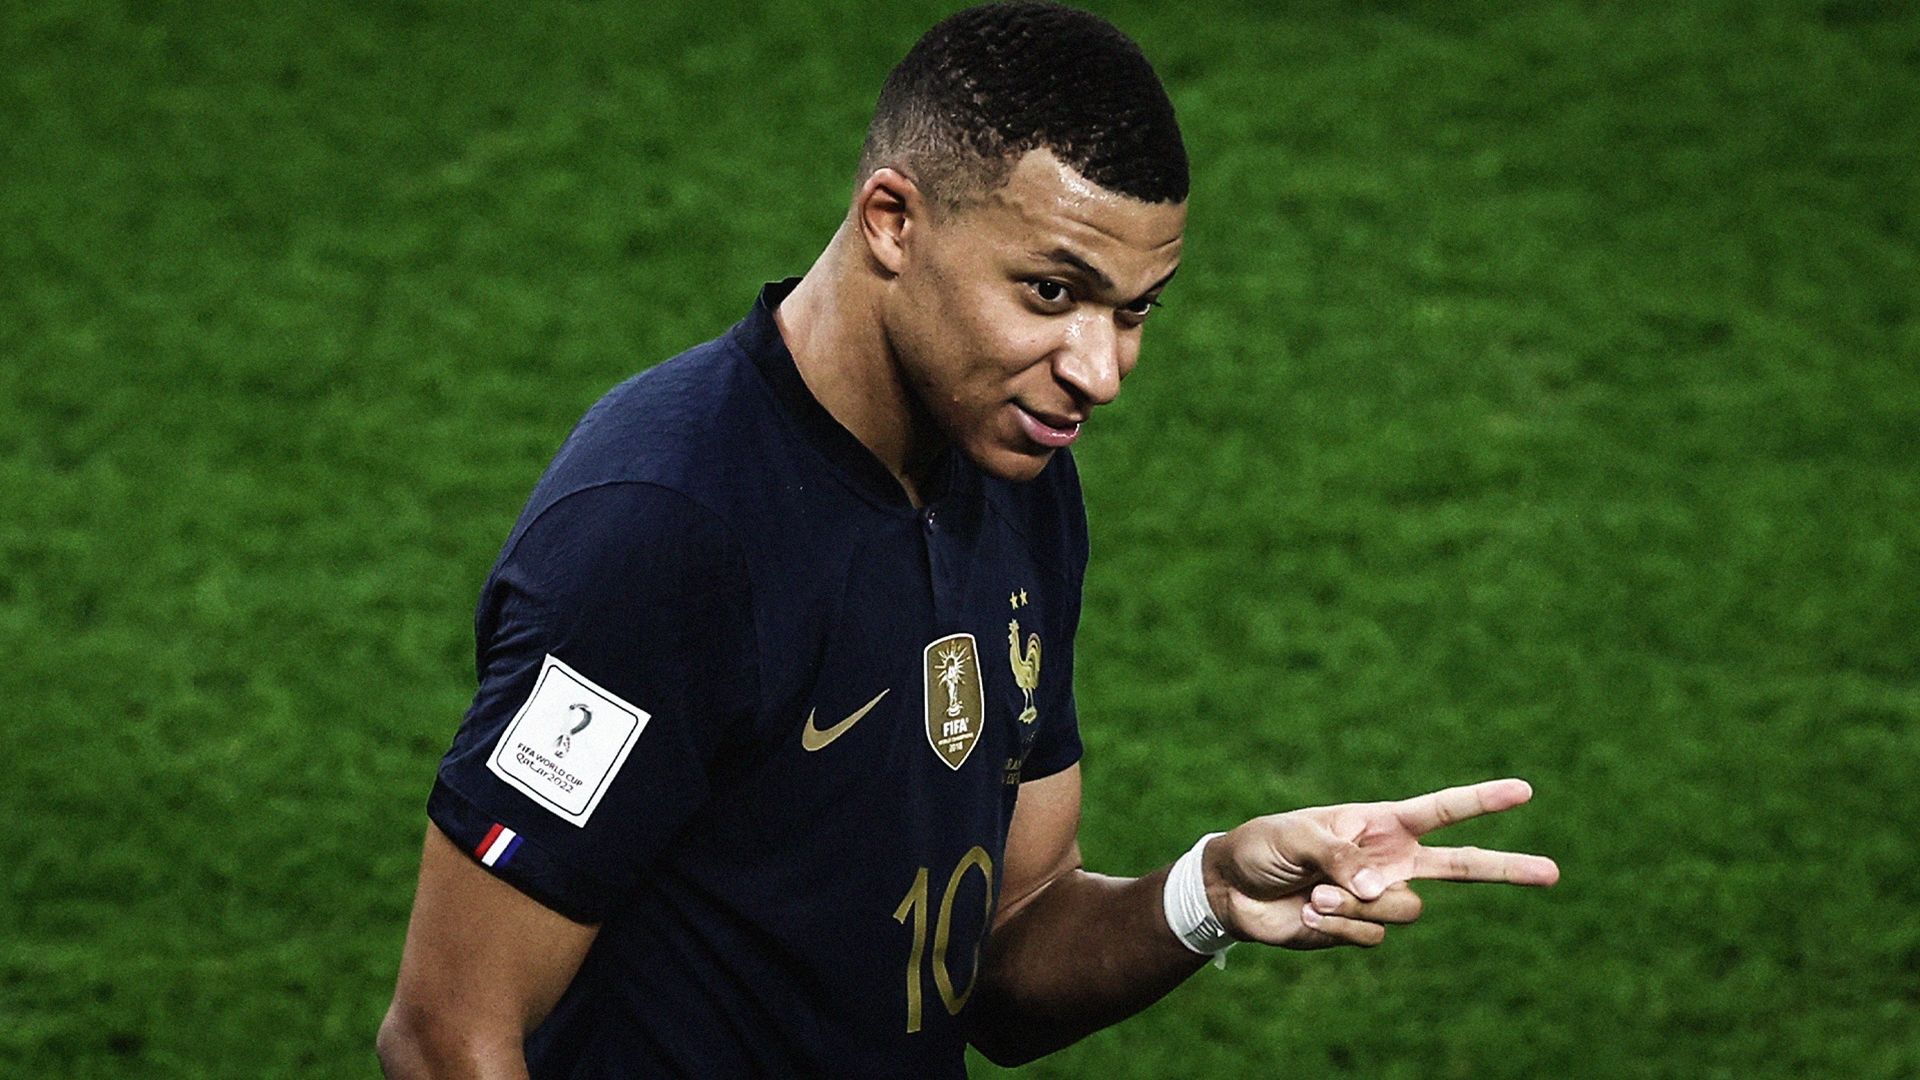 Mbappé demands that PSG sell Neymar, buy Kane and appoint Zidane